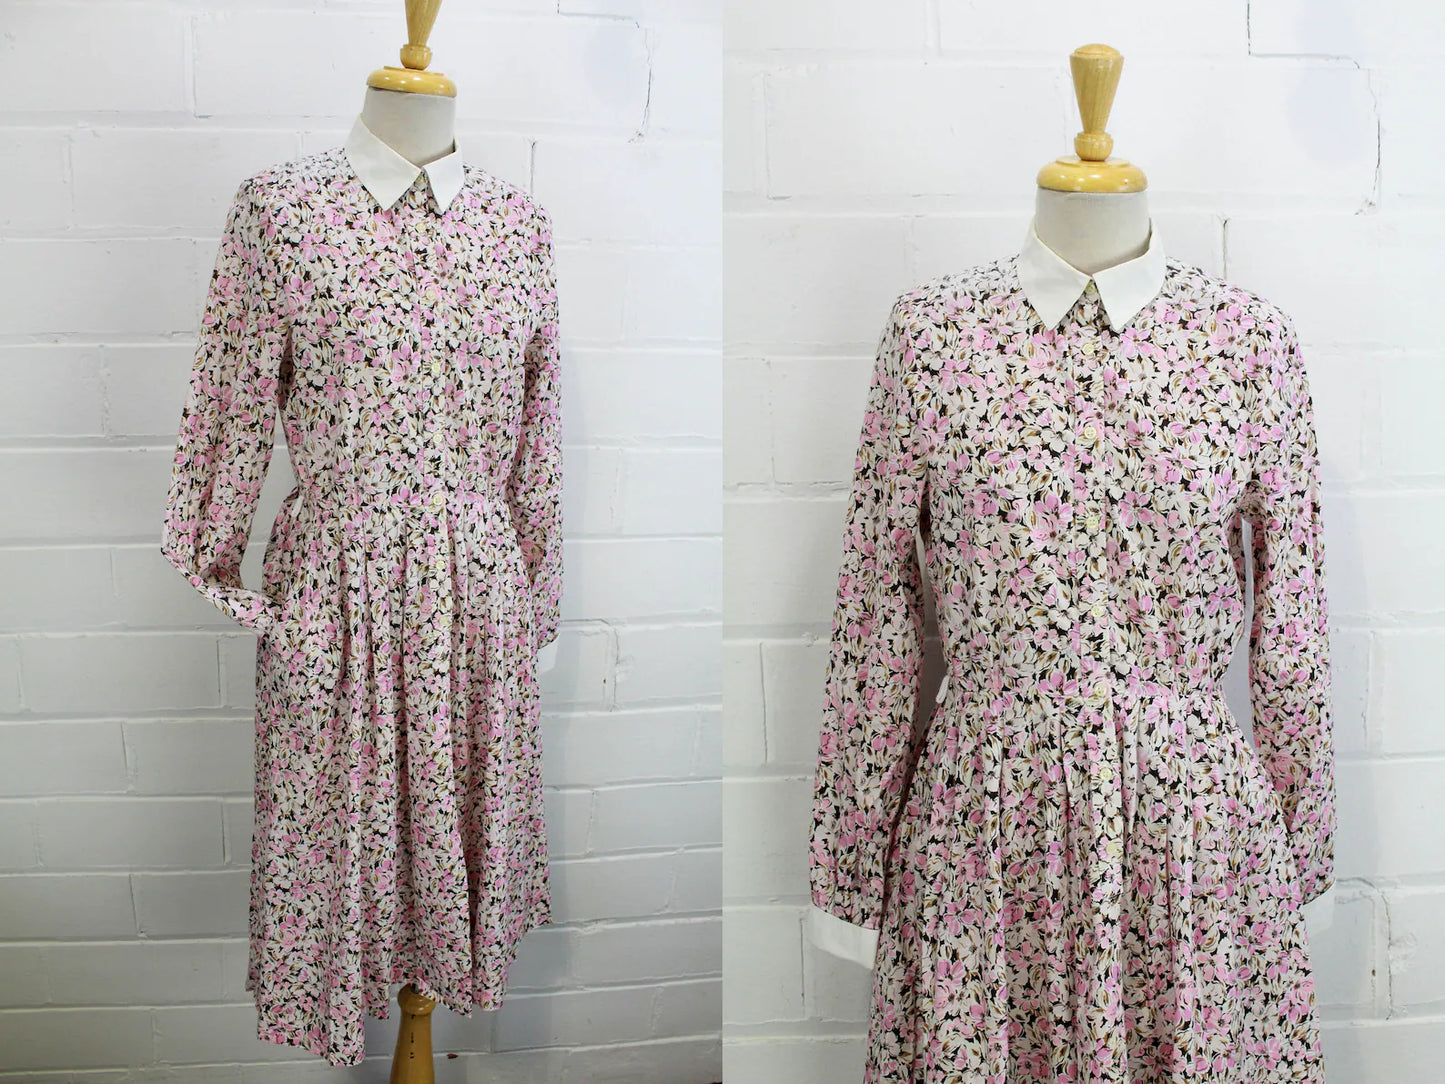 80s does 50s Horrockses Dress, Shirtwaist Dress with Pink Floral Print, Vintage Button Up Collared dress